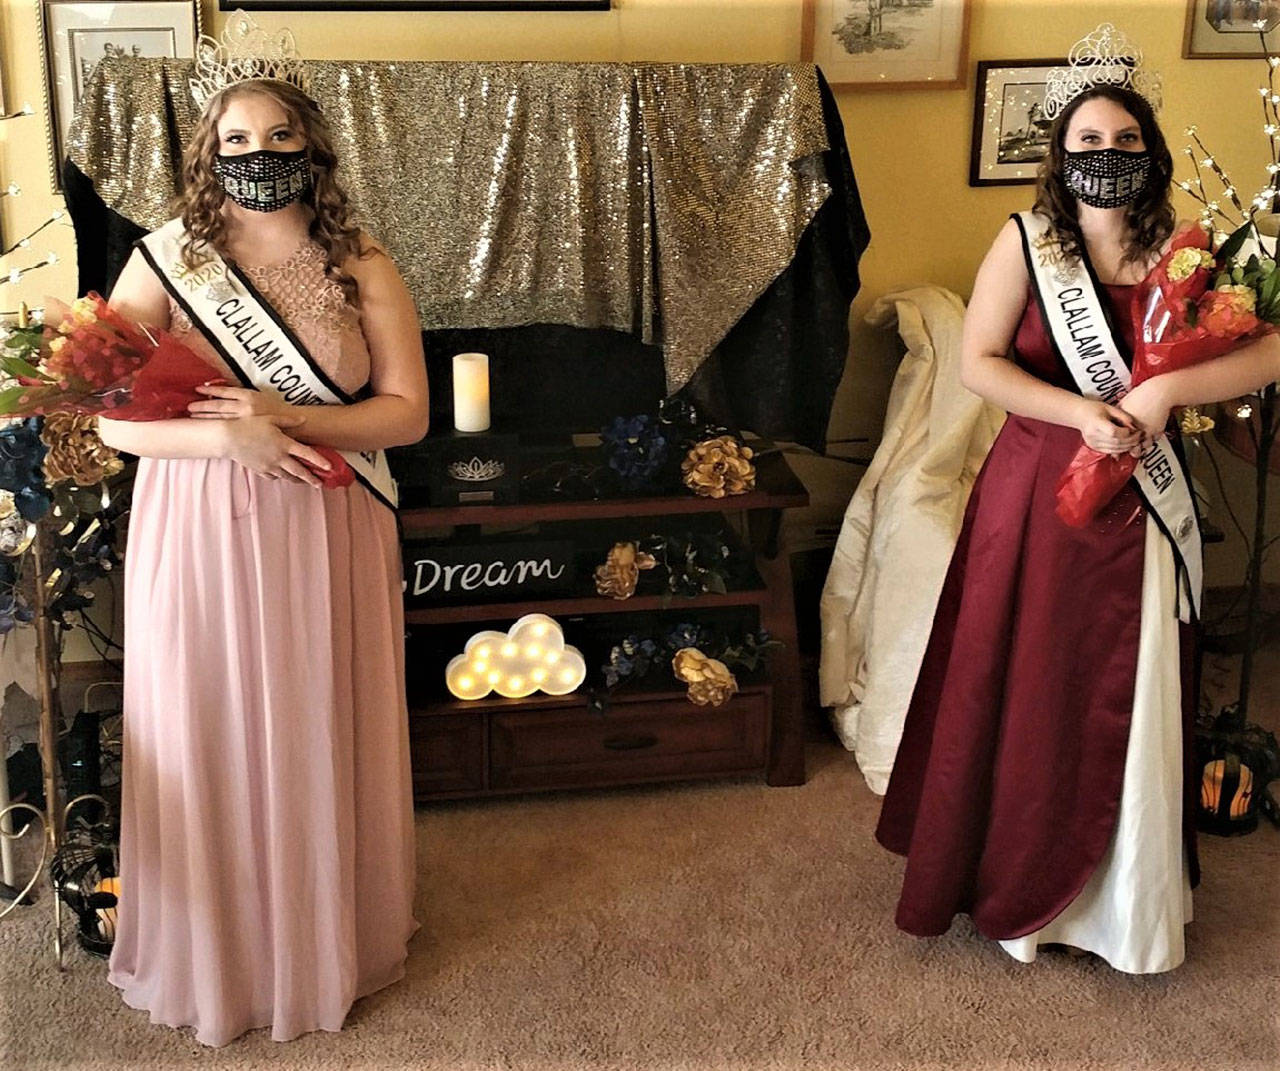 Photo courtesy of the Clallam County Fair
Ann Menkal, left, and Rebekah Parker will preside over the Clallam County Fair festivities as queens this year. Menkal, 17, is a senior at Port Angeles High School who was named the 2020 queen. Parker, 17, a princess for the 2019 fair, is a senior at Sequim High School and Olympic Peninsula Academy.